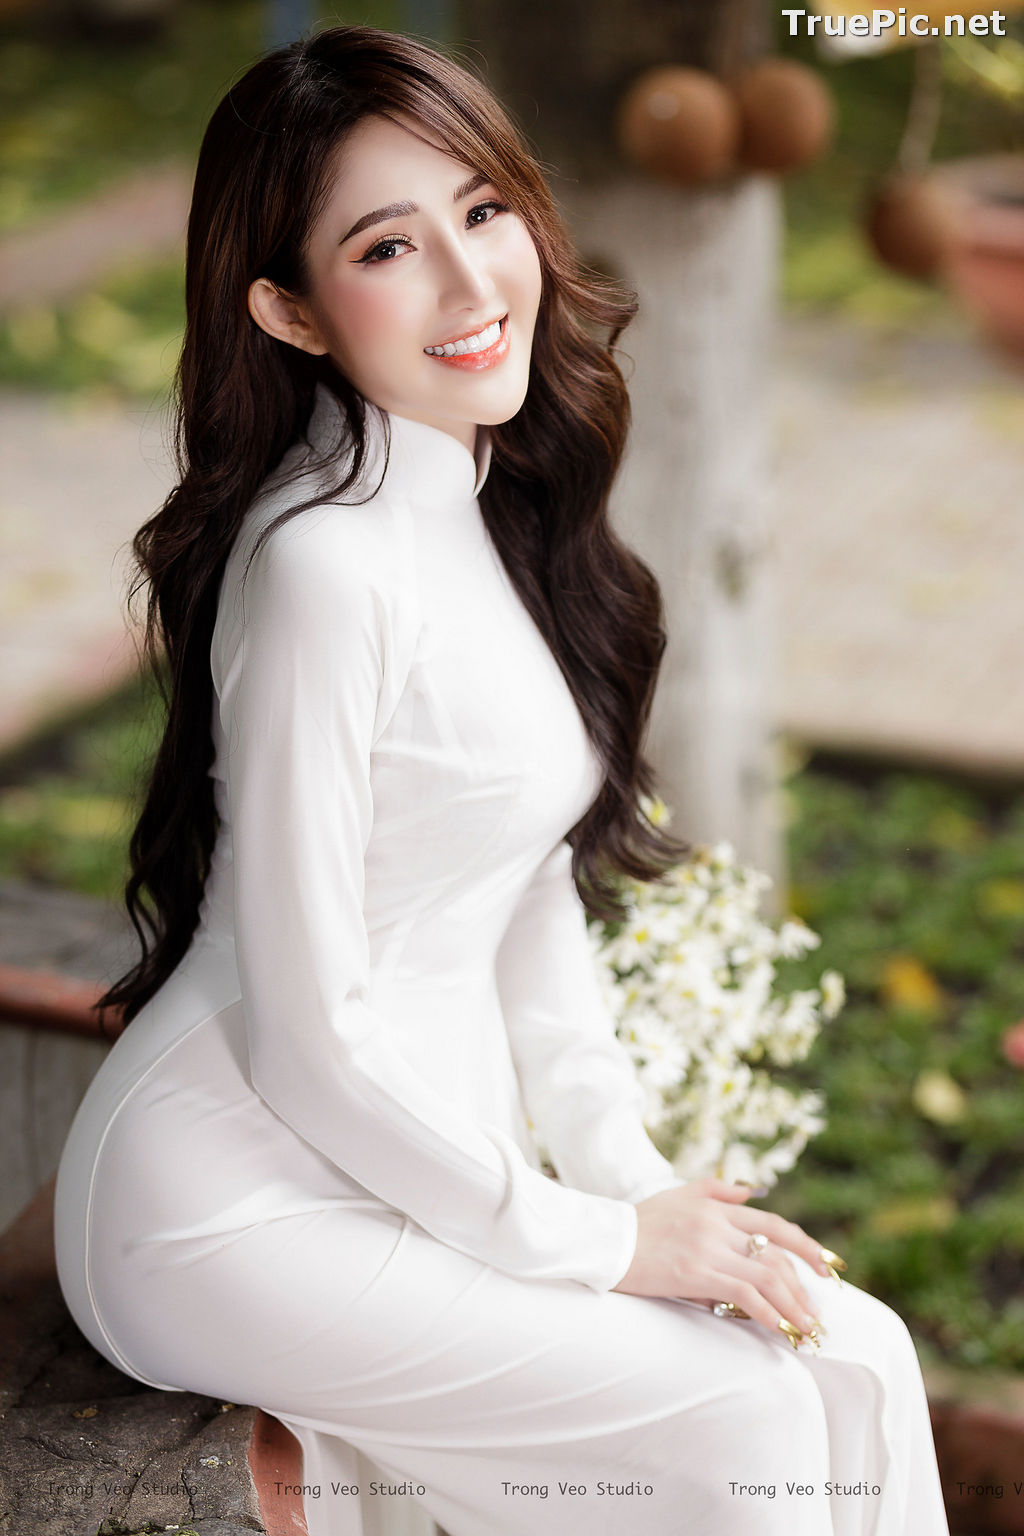 True Pic The Beauty Of Vietnamese Girls With Traditional Dress Ao Dai 3 